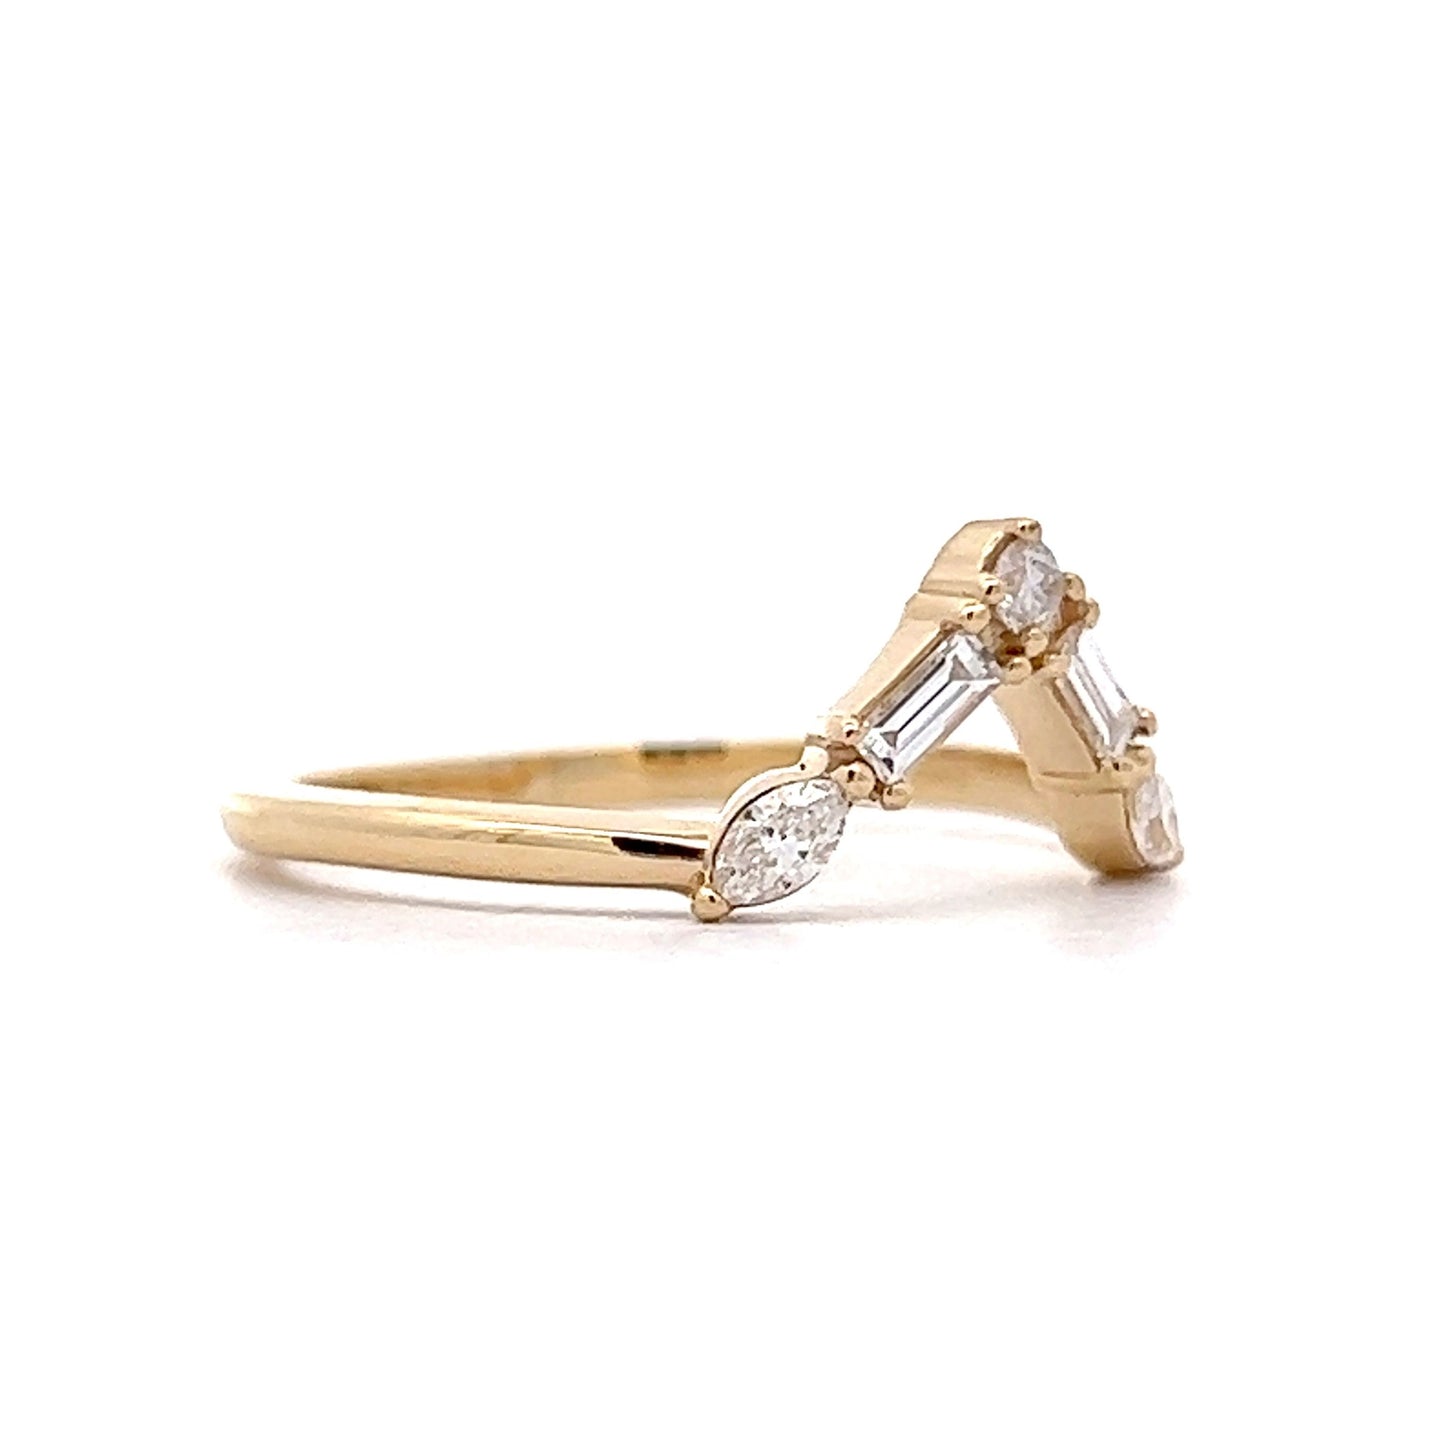 .31 V Shaped Contour Wedding Band in 14k Yellow Gold